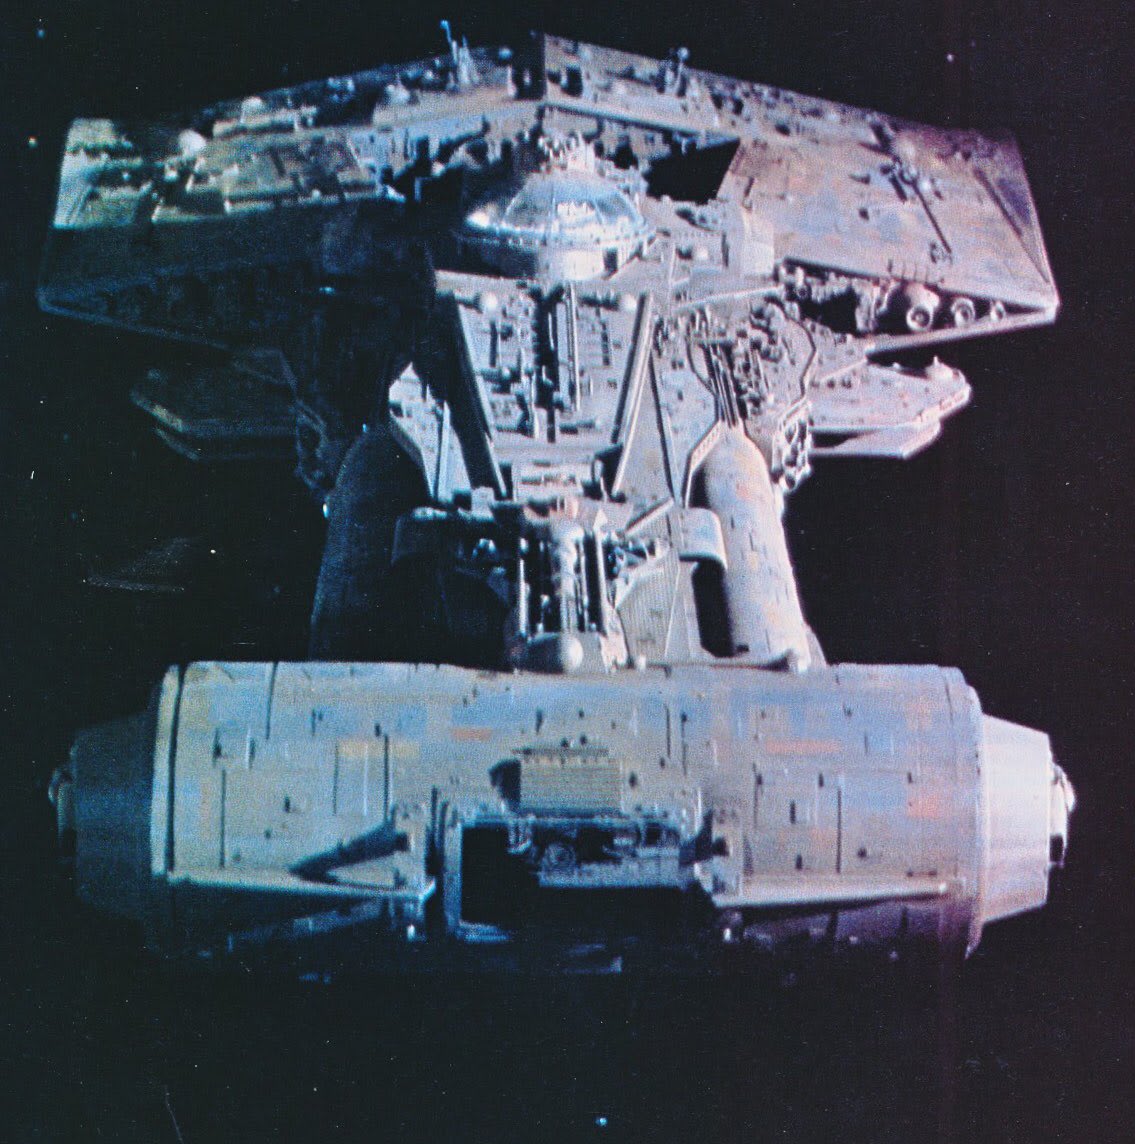 Some random spaceships for you. Name the movies.